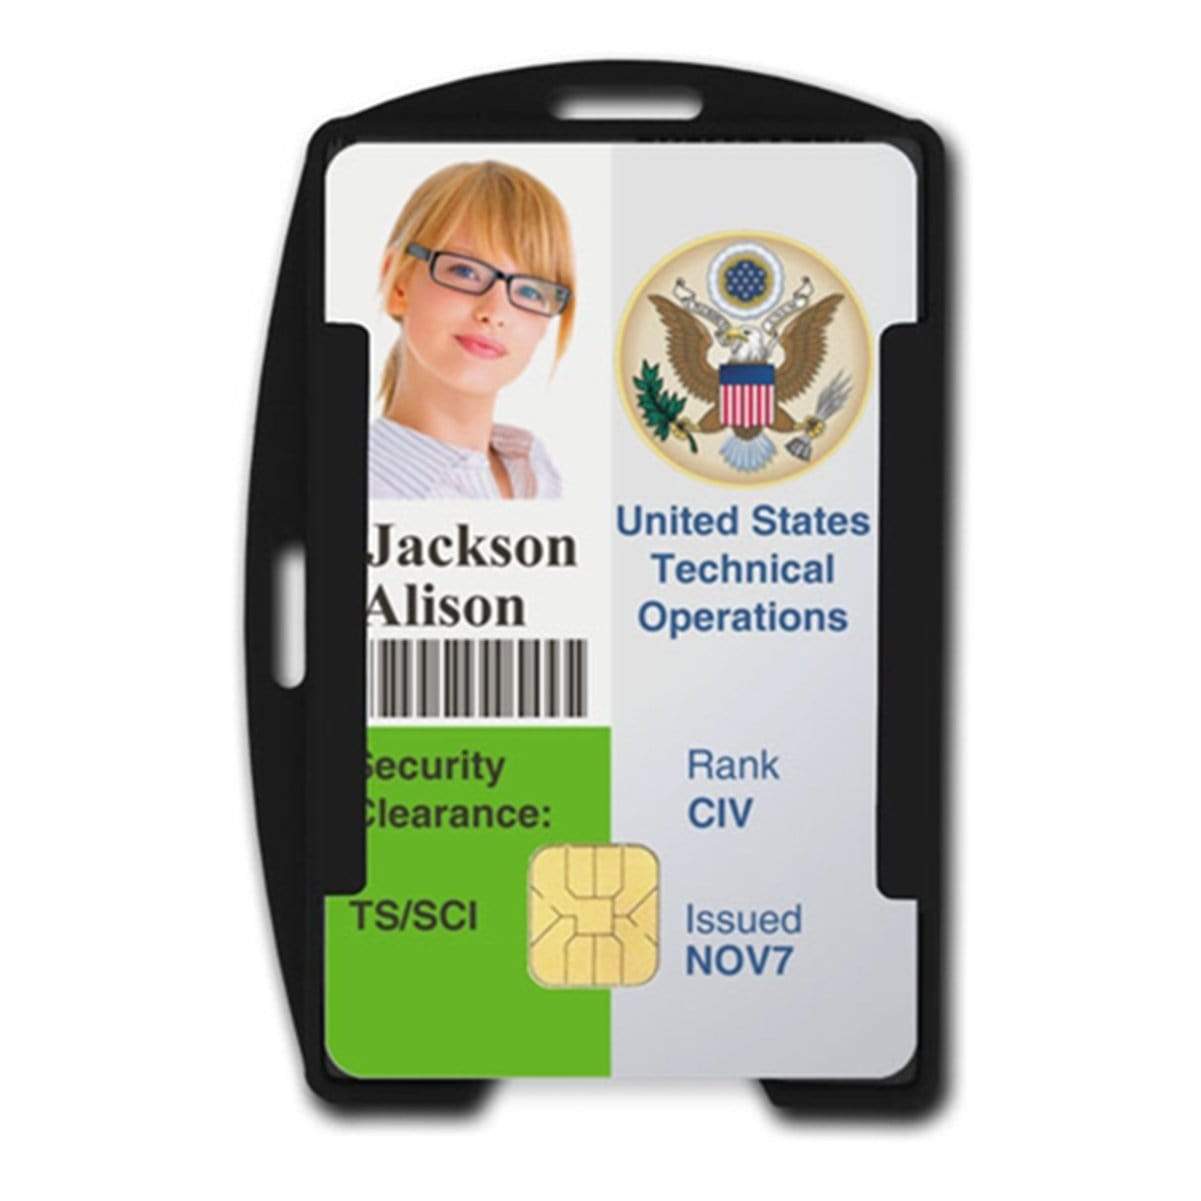 ID badge with photo of a person, labeled "Jackson Alison." Includes a barcode, security clearance level TS/SCI, rank CIV, issued date NOV7, and the emblem of the United States Technical Operations. The SkimSAFE FIPS 201 RFID Blocking 2-Card ID Holder (AH-210) features RFID blocking and complies with FIPS 201 standards.